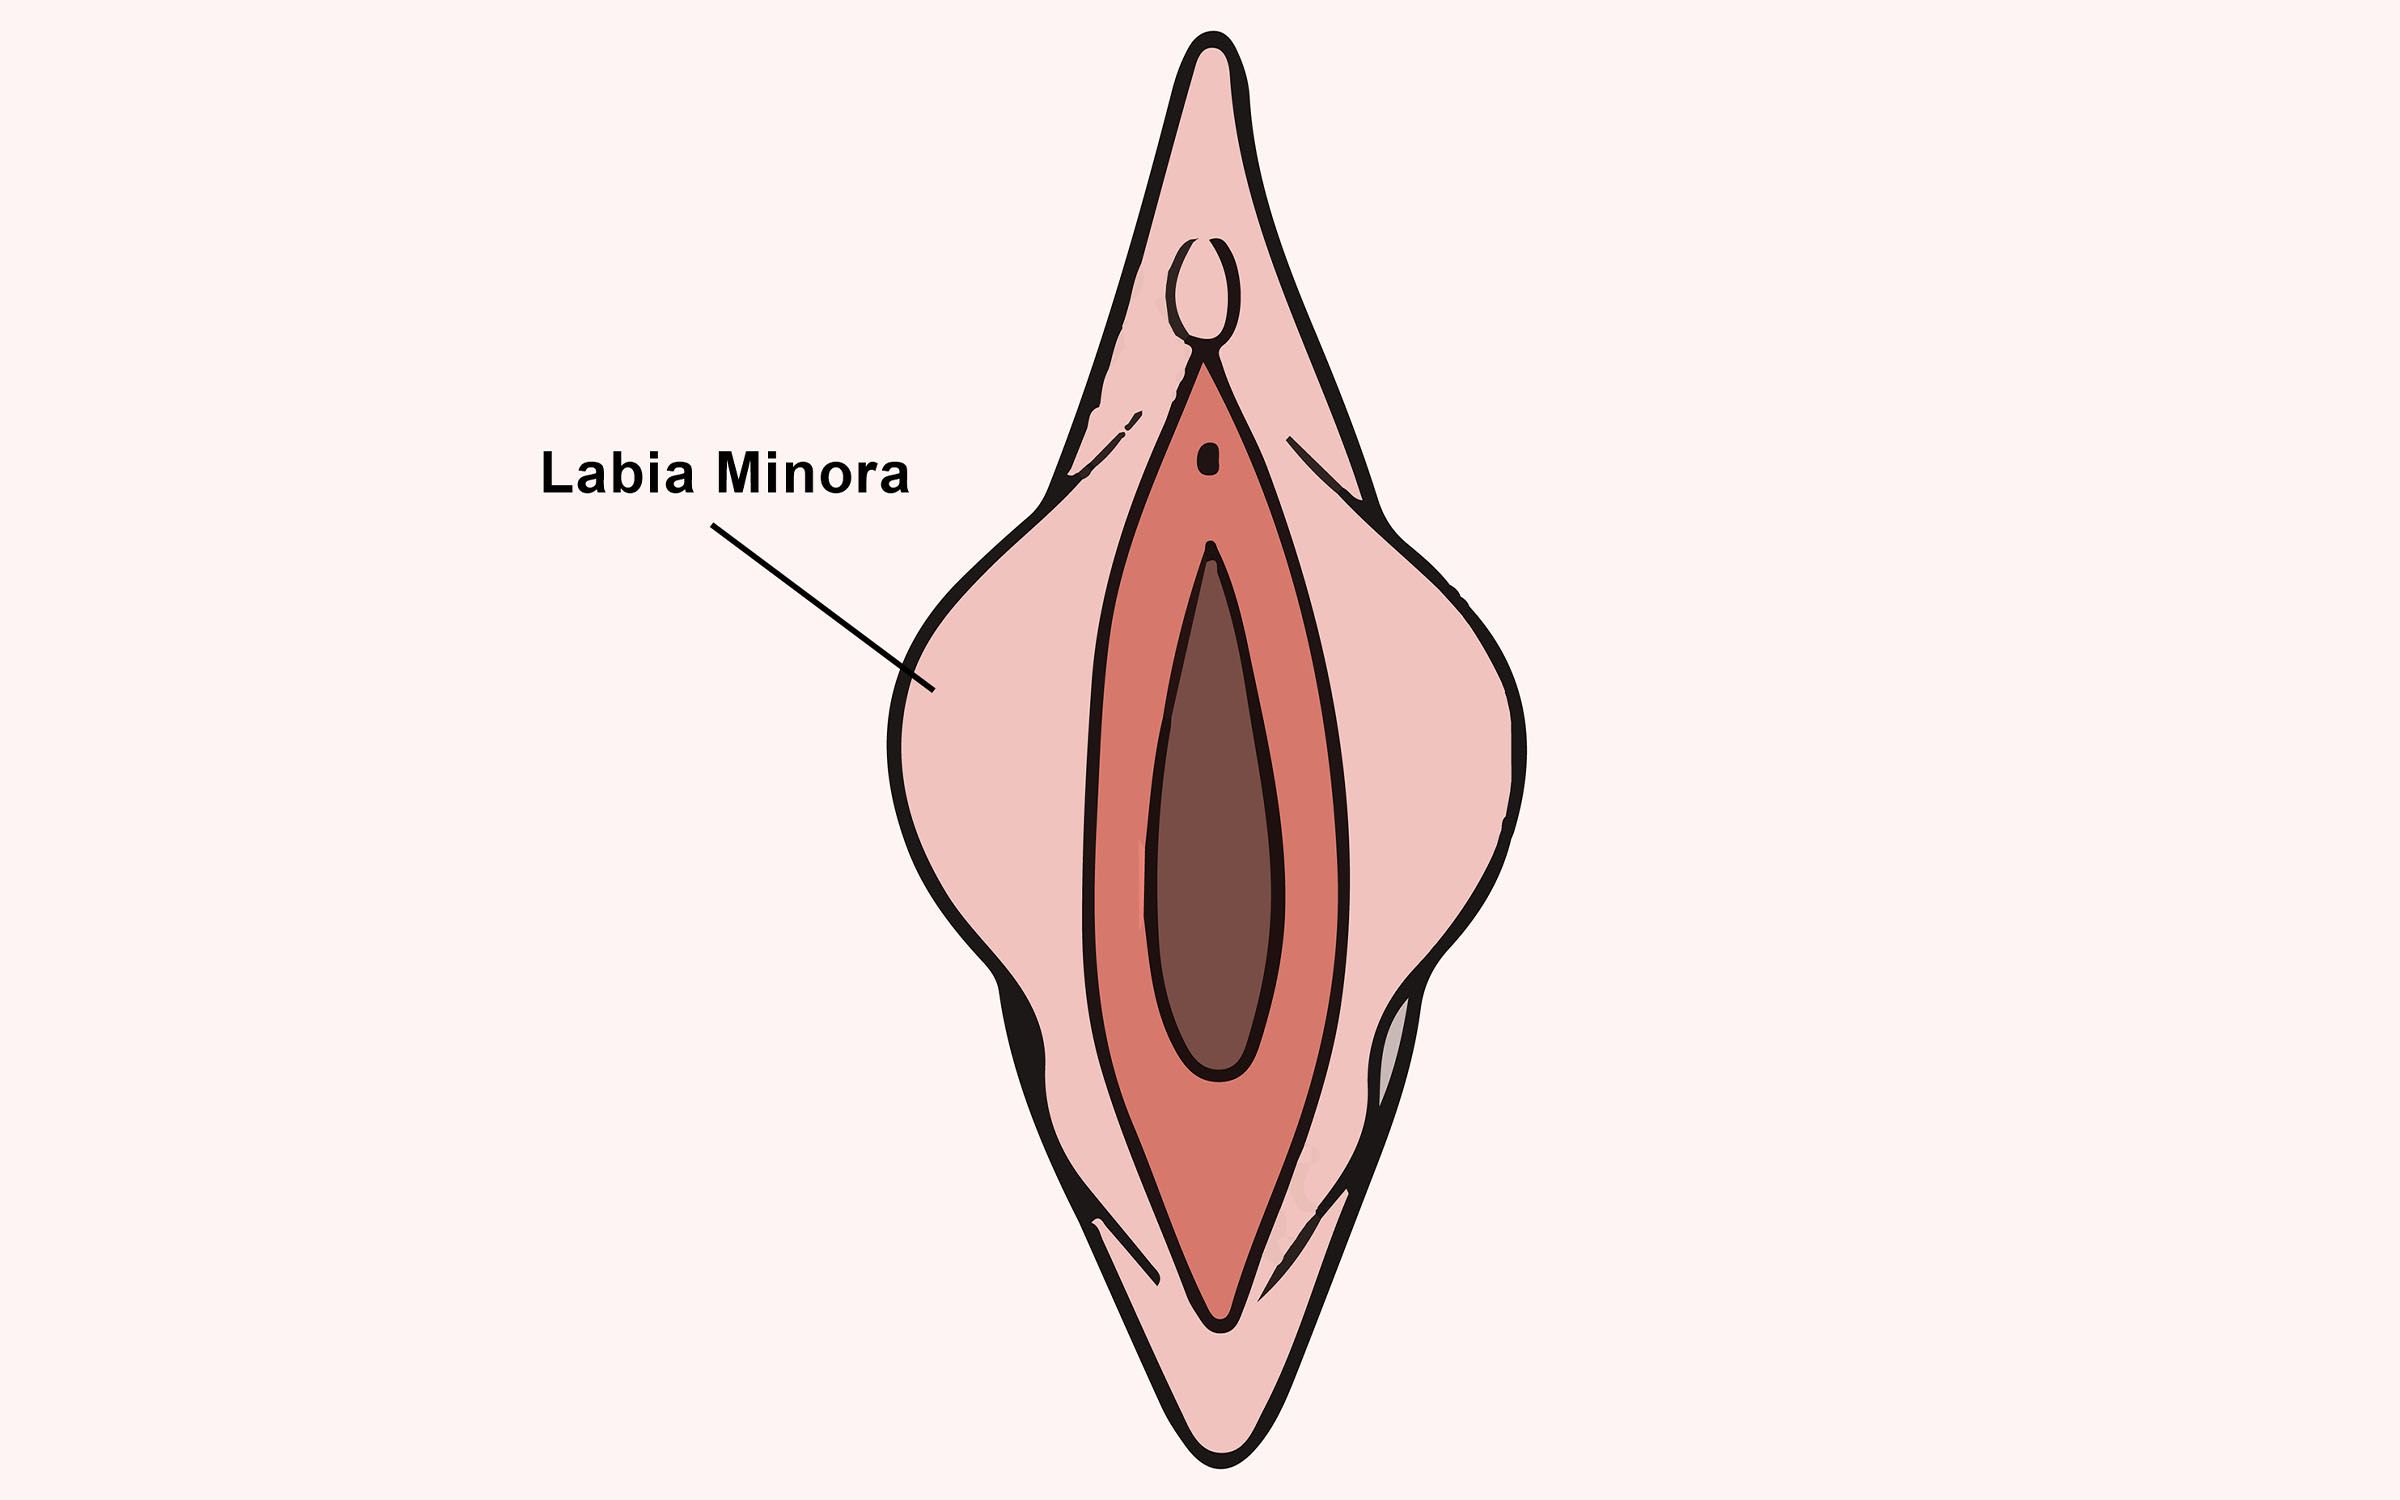 Close up image of a woman's inner vaginal lips of labia minora